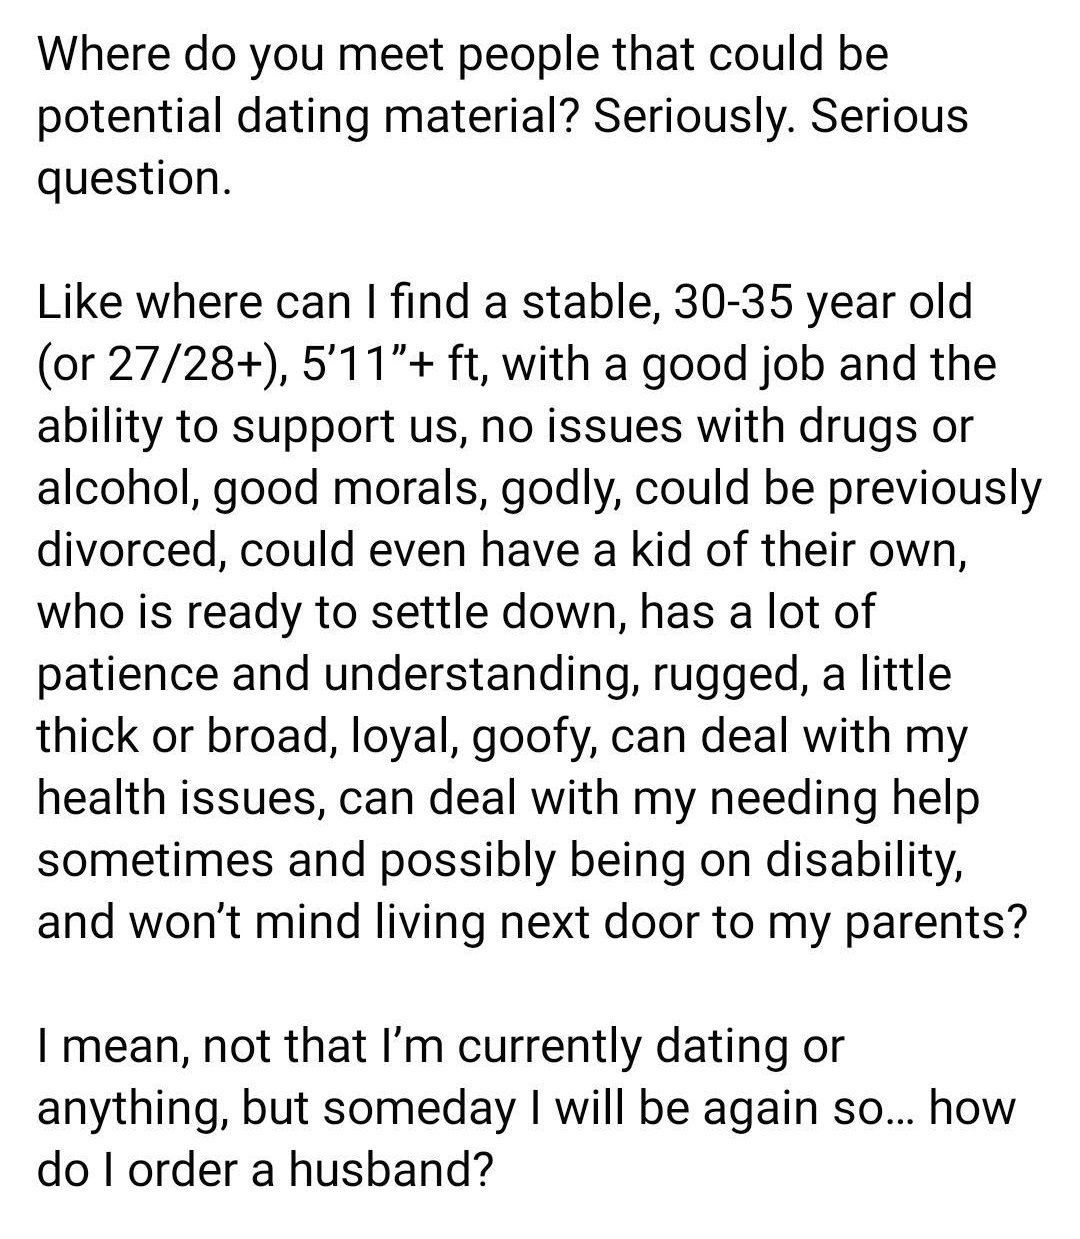 entitled people - angle - Where do you meet people that could be potential dating material? Seriously. Serious question. where can I find a stable, 3035 year old or 2728, 5'11"ft, with a good job and the ability to support us, no issues with drugs or alco